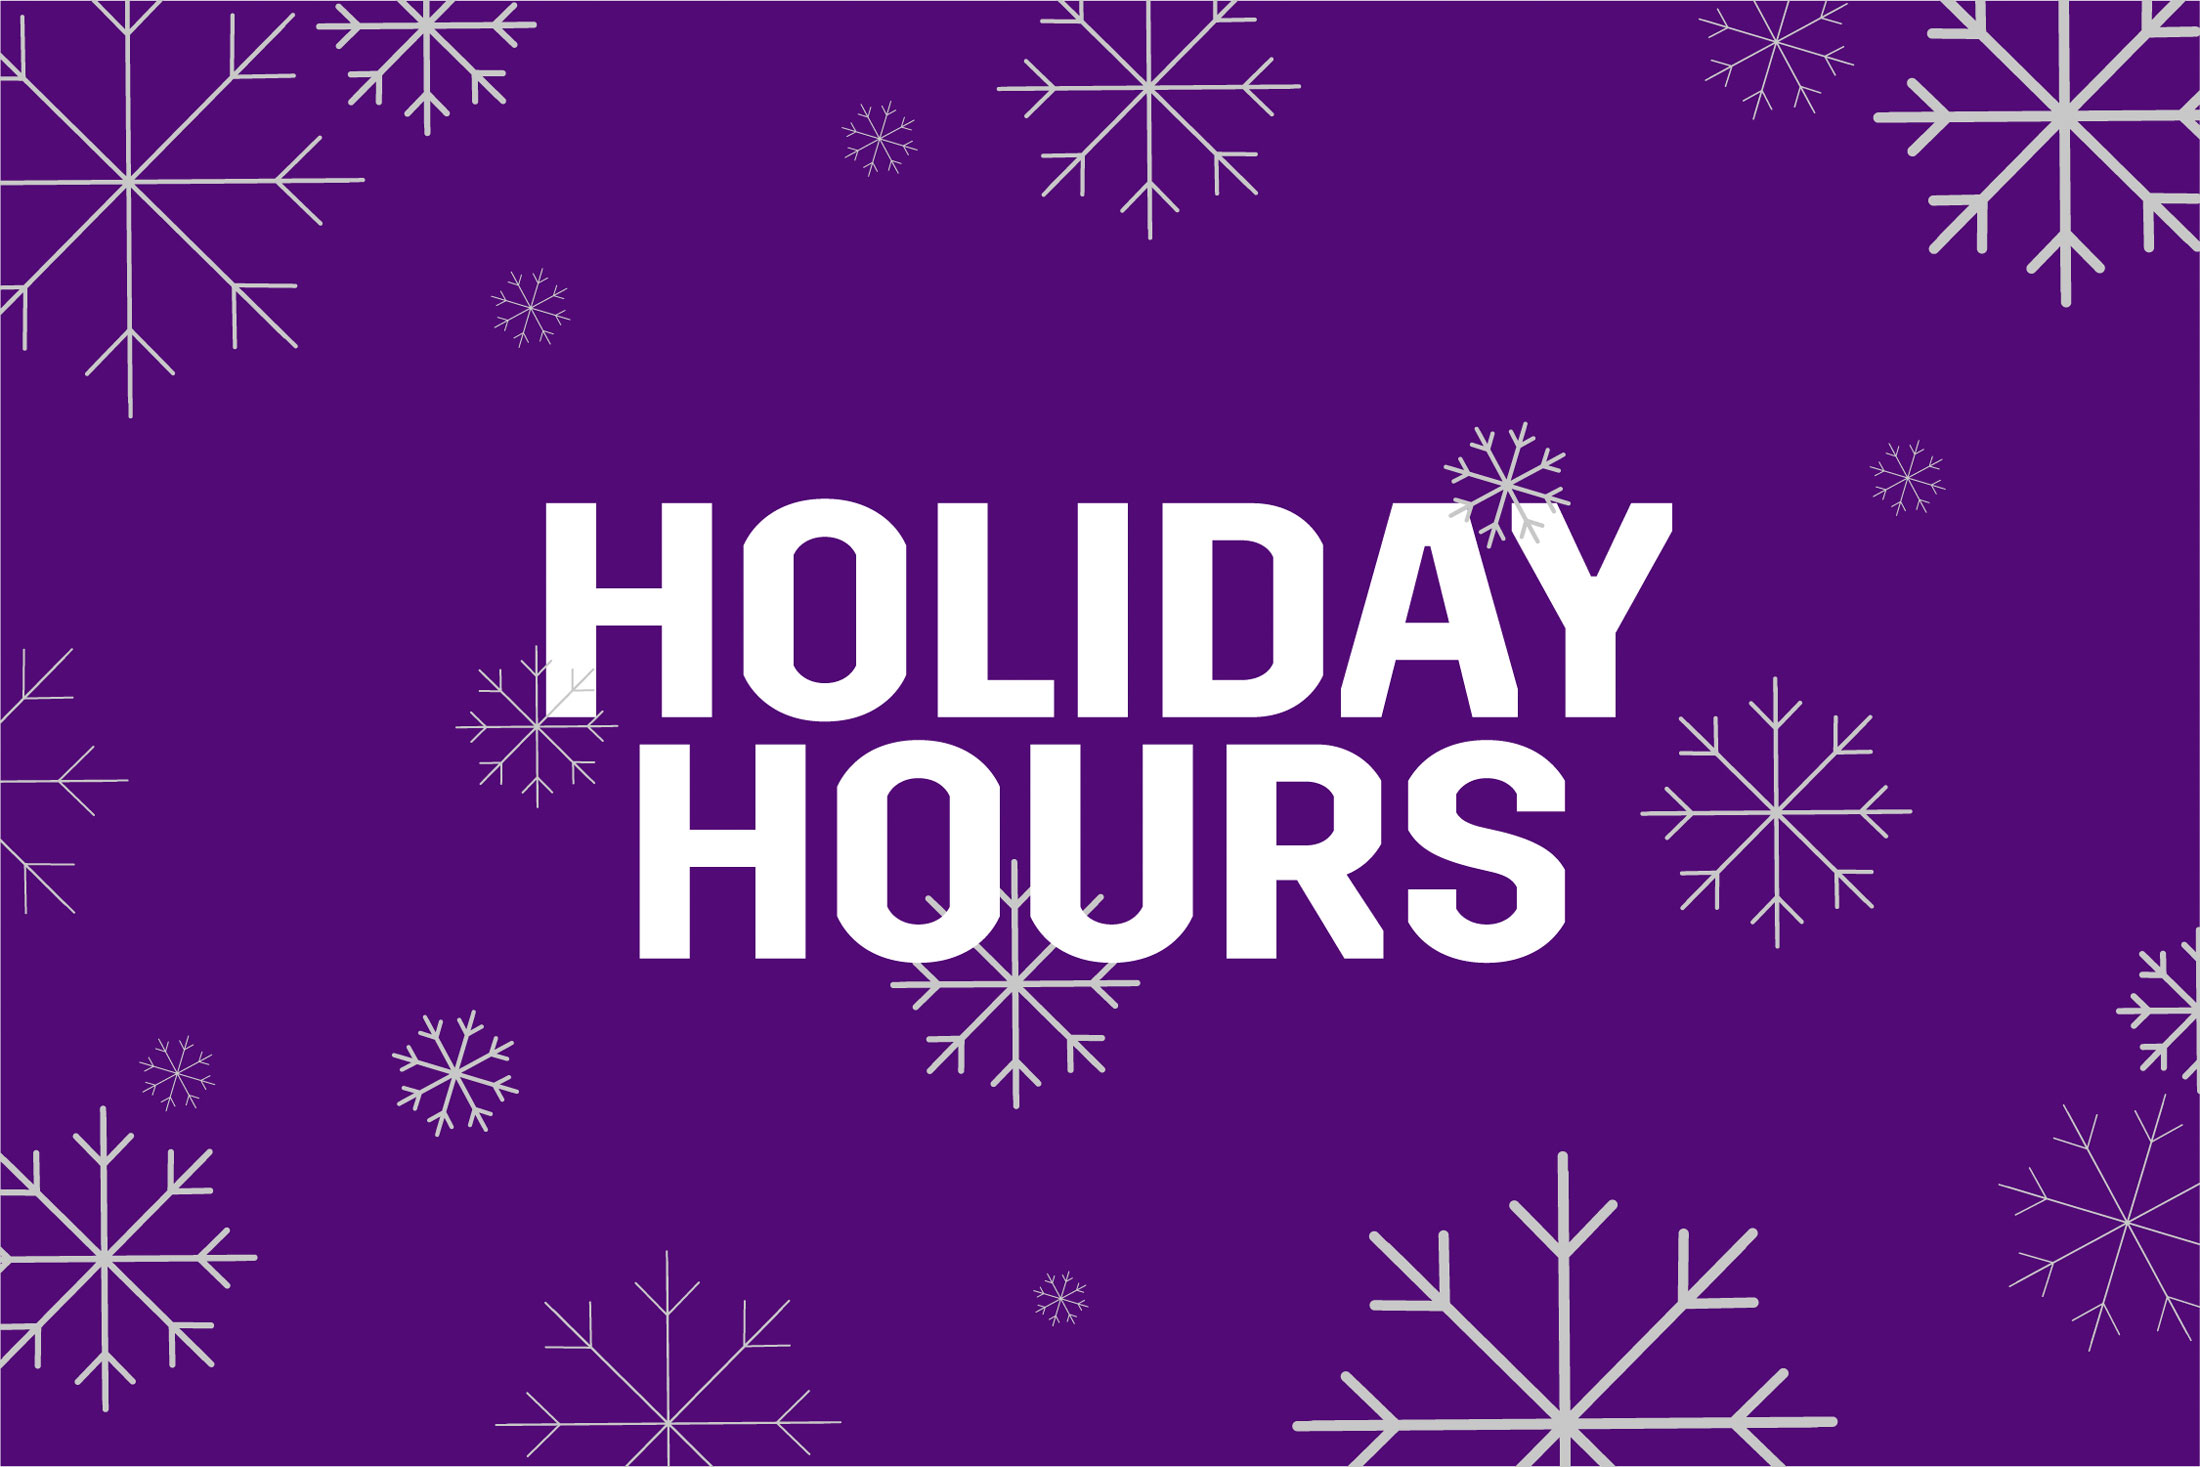 Holiday hours graphic